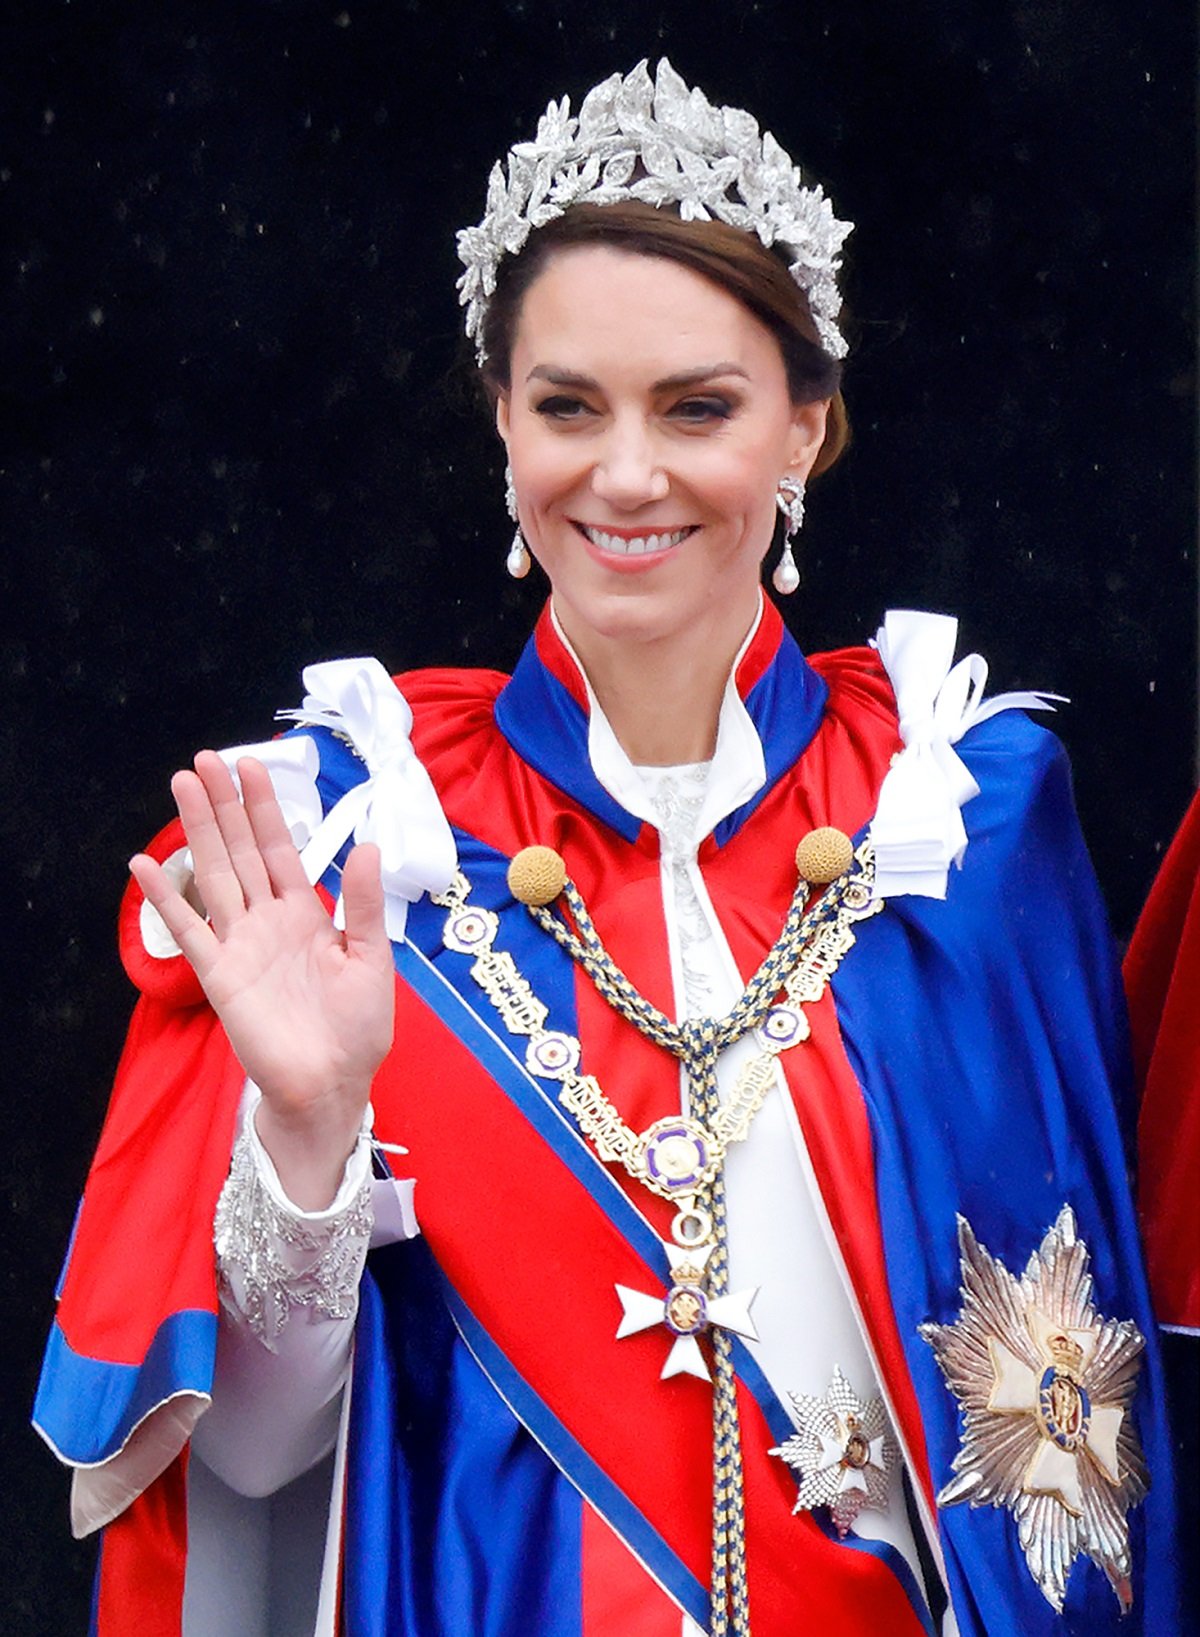 Kate Middleton wearing the Mantle of the Royal Victorian Order robe as she waves the balcony of Buckingham Palace